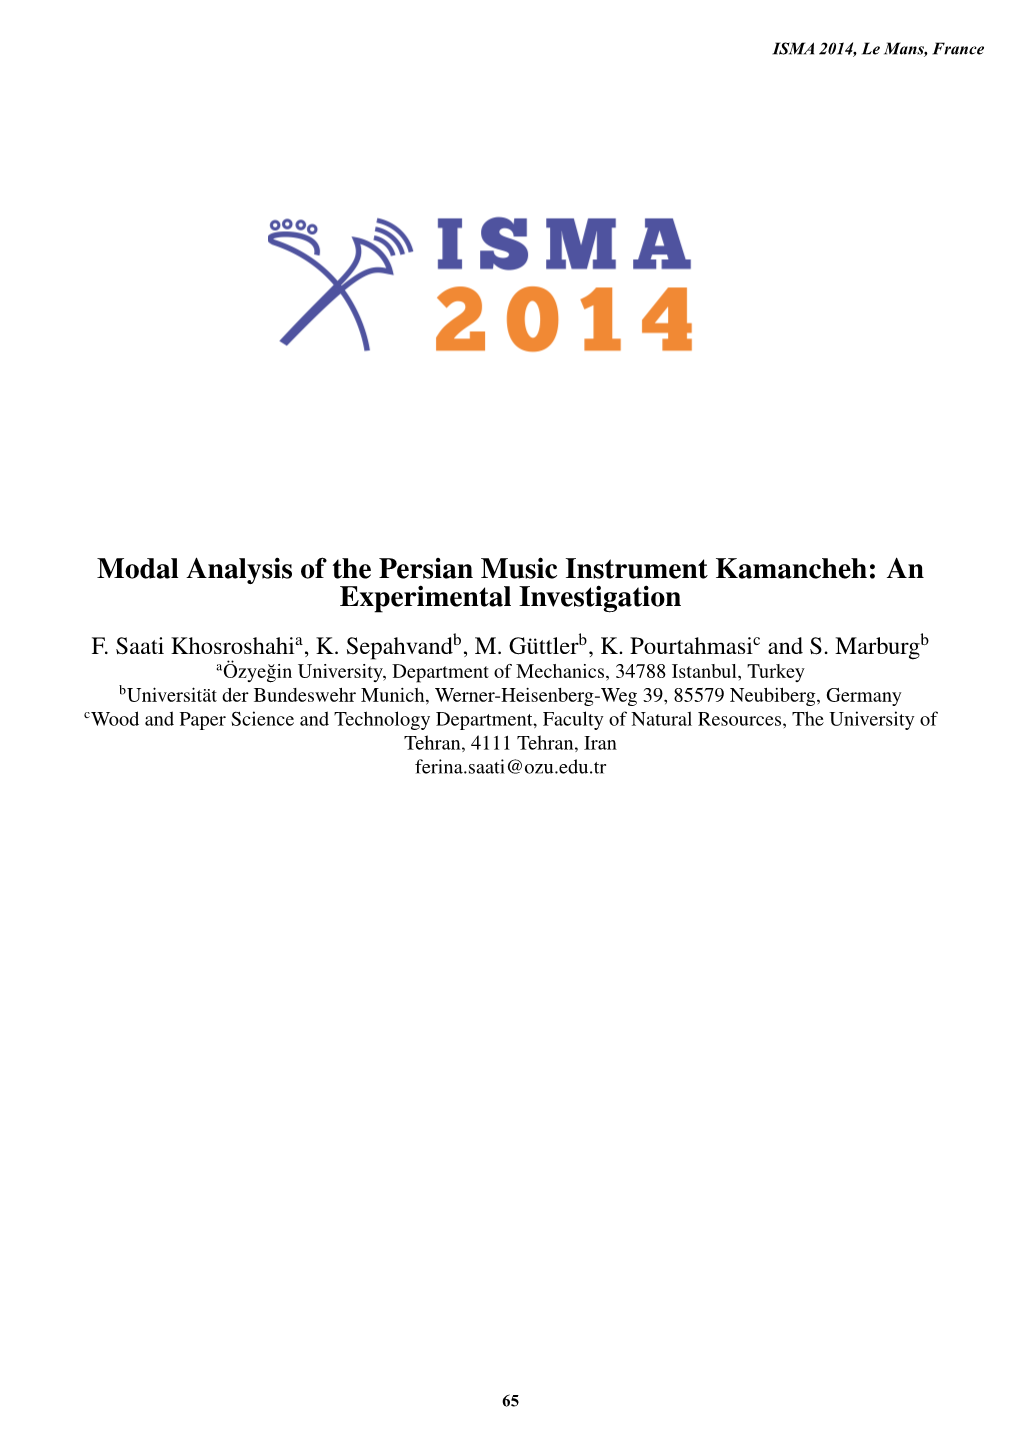 Modal Analysis of the Persian Music Instrument Kamancheh: an Experimental Investigation F